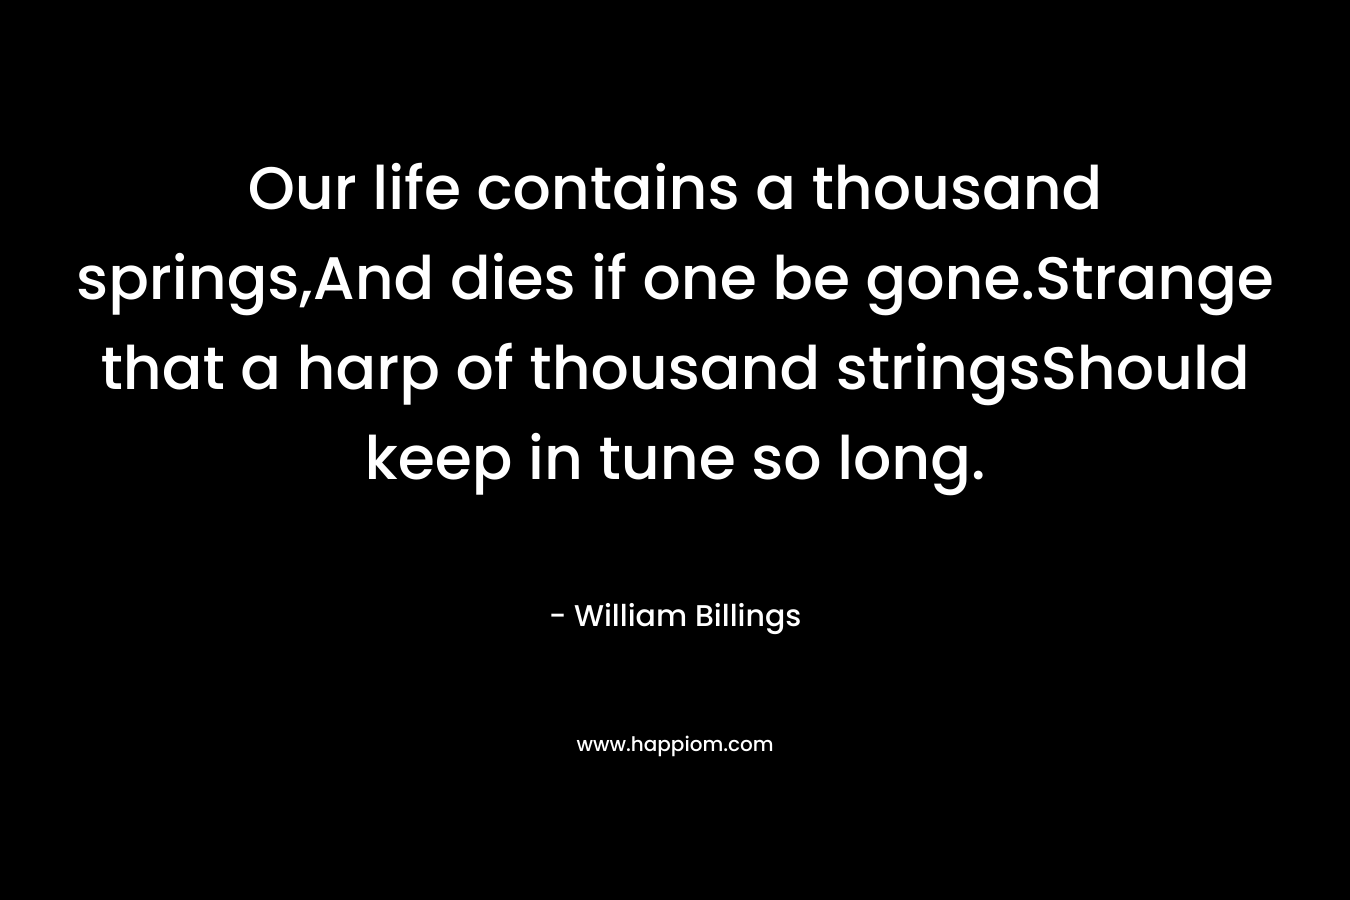 Our life contains a thousand springs,And dies if one be gone.Strange that a harp of thousand stringsShould keep in tune so long. – William Billings